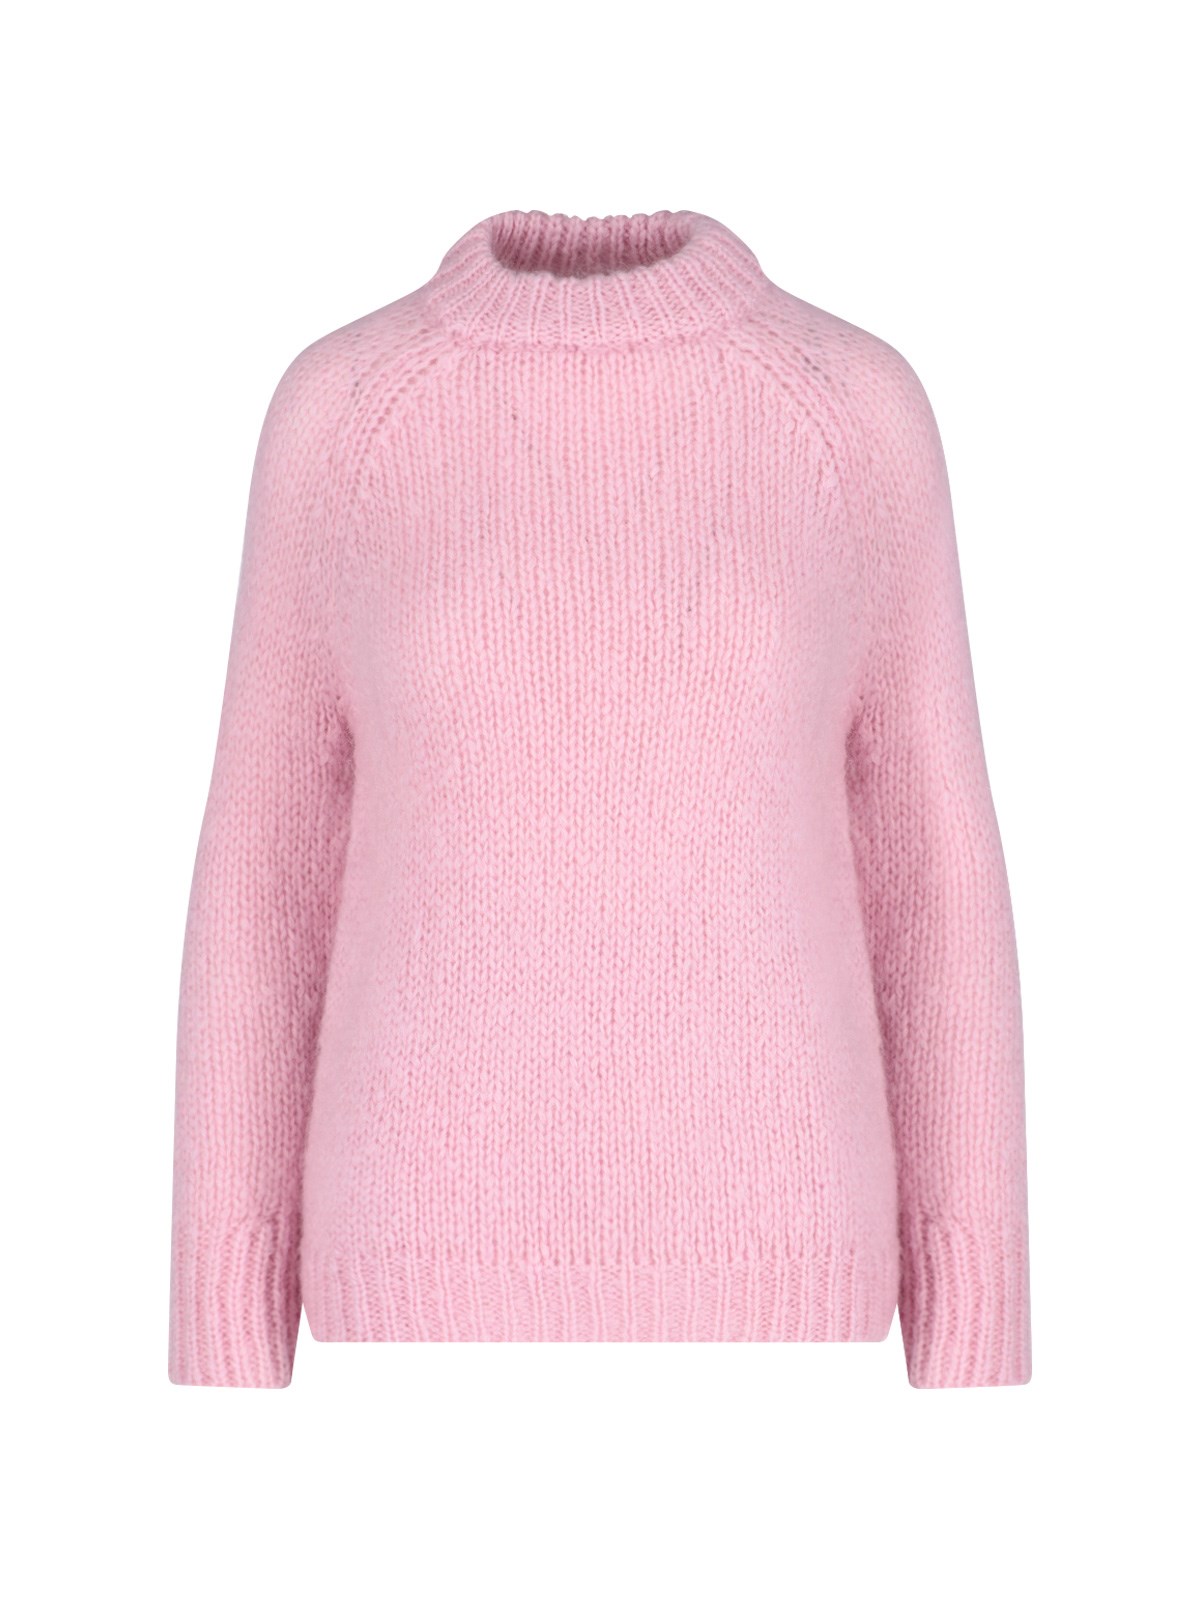 Women's CECILIE BAHNSEN Sweaters Sale, Up To 70% Off | ModeSens